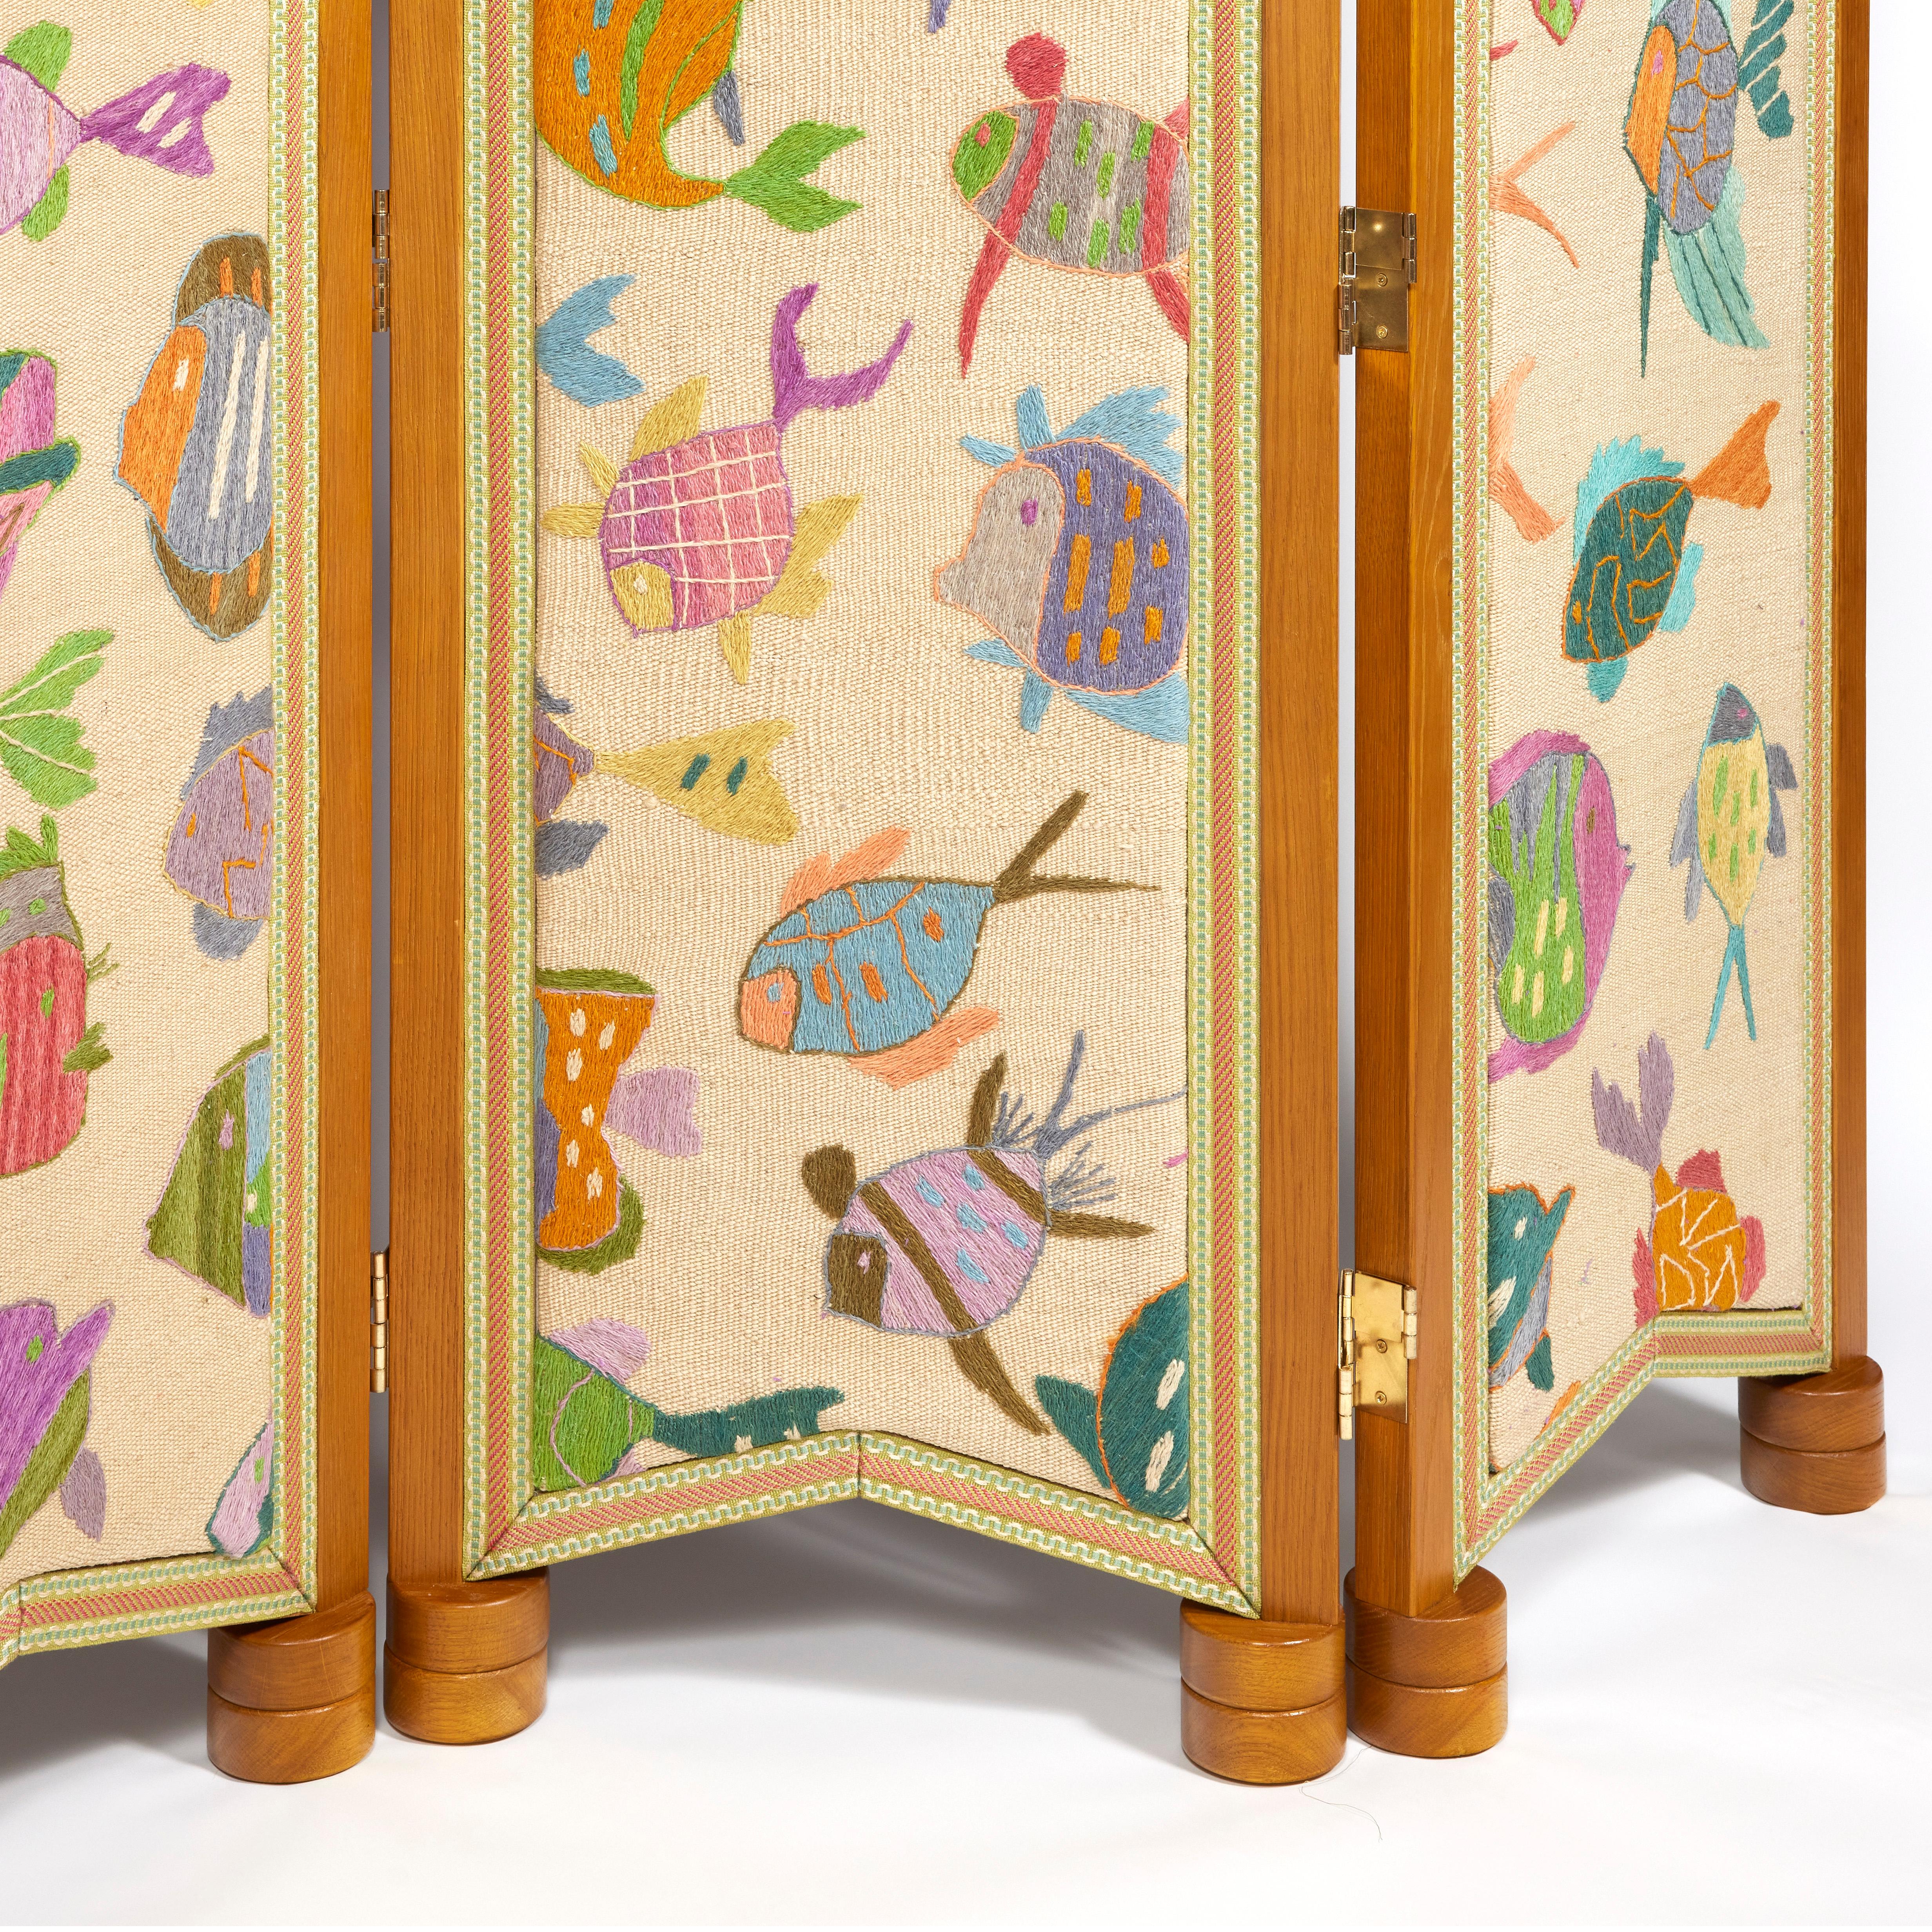 Screen upholstered on the back with a hand-broidered canvas with a fish motif framed with passementerie and on the front with an 